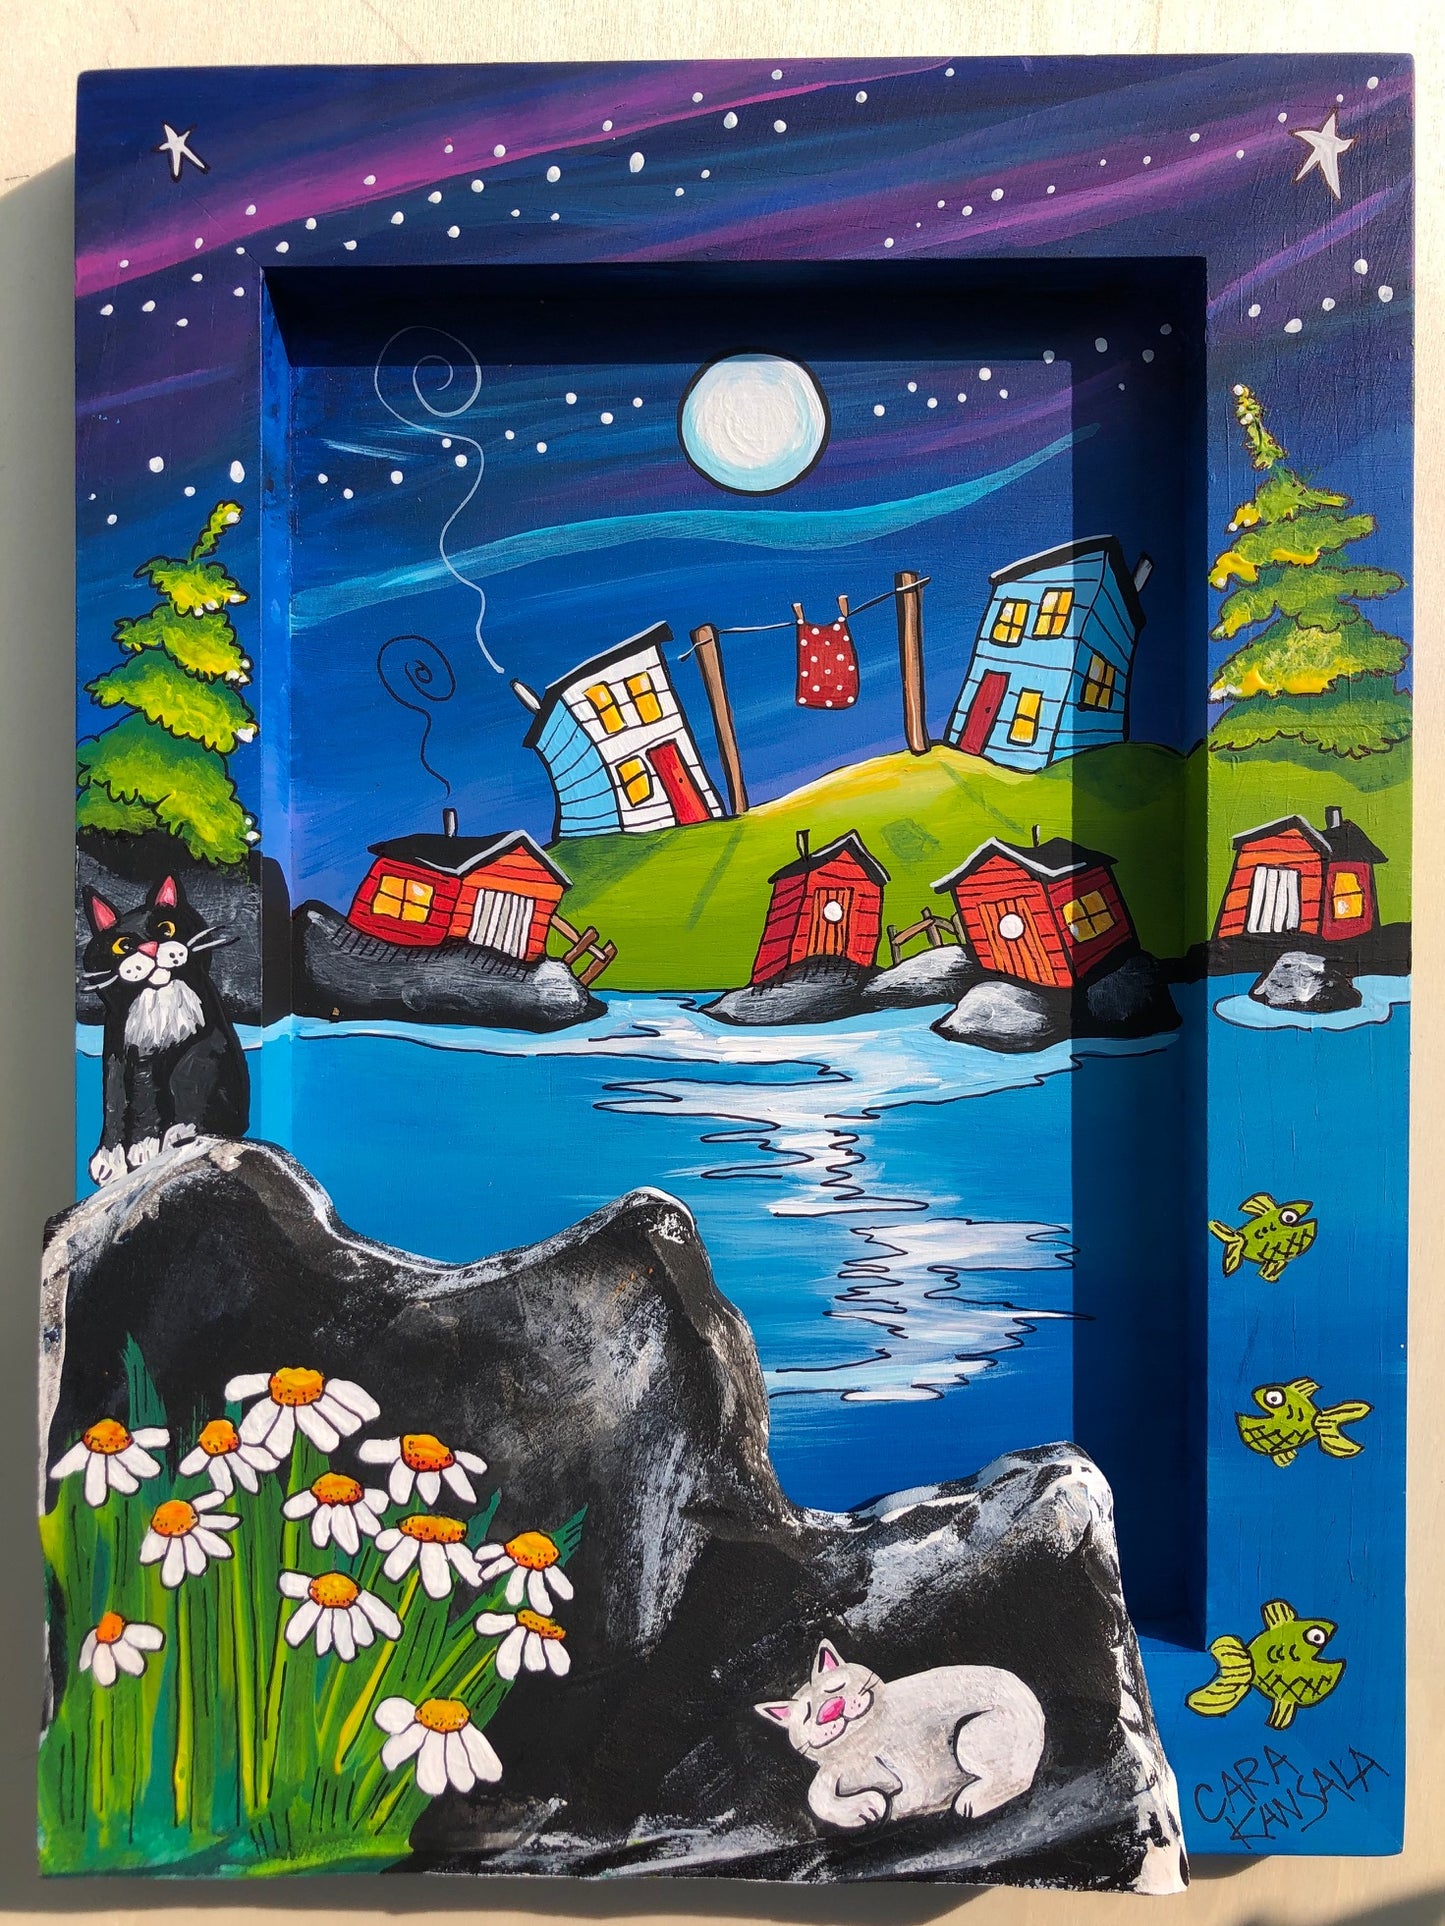 (SOLD) On a Quiet Night, While the Fish Swan By, The Cat on the Hill Sang Lullaby's, The Chimney Puffed Smoke While the Stars Twinkled High and the Red Quilt Stayed Out = Nan Hoped It Would Dry